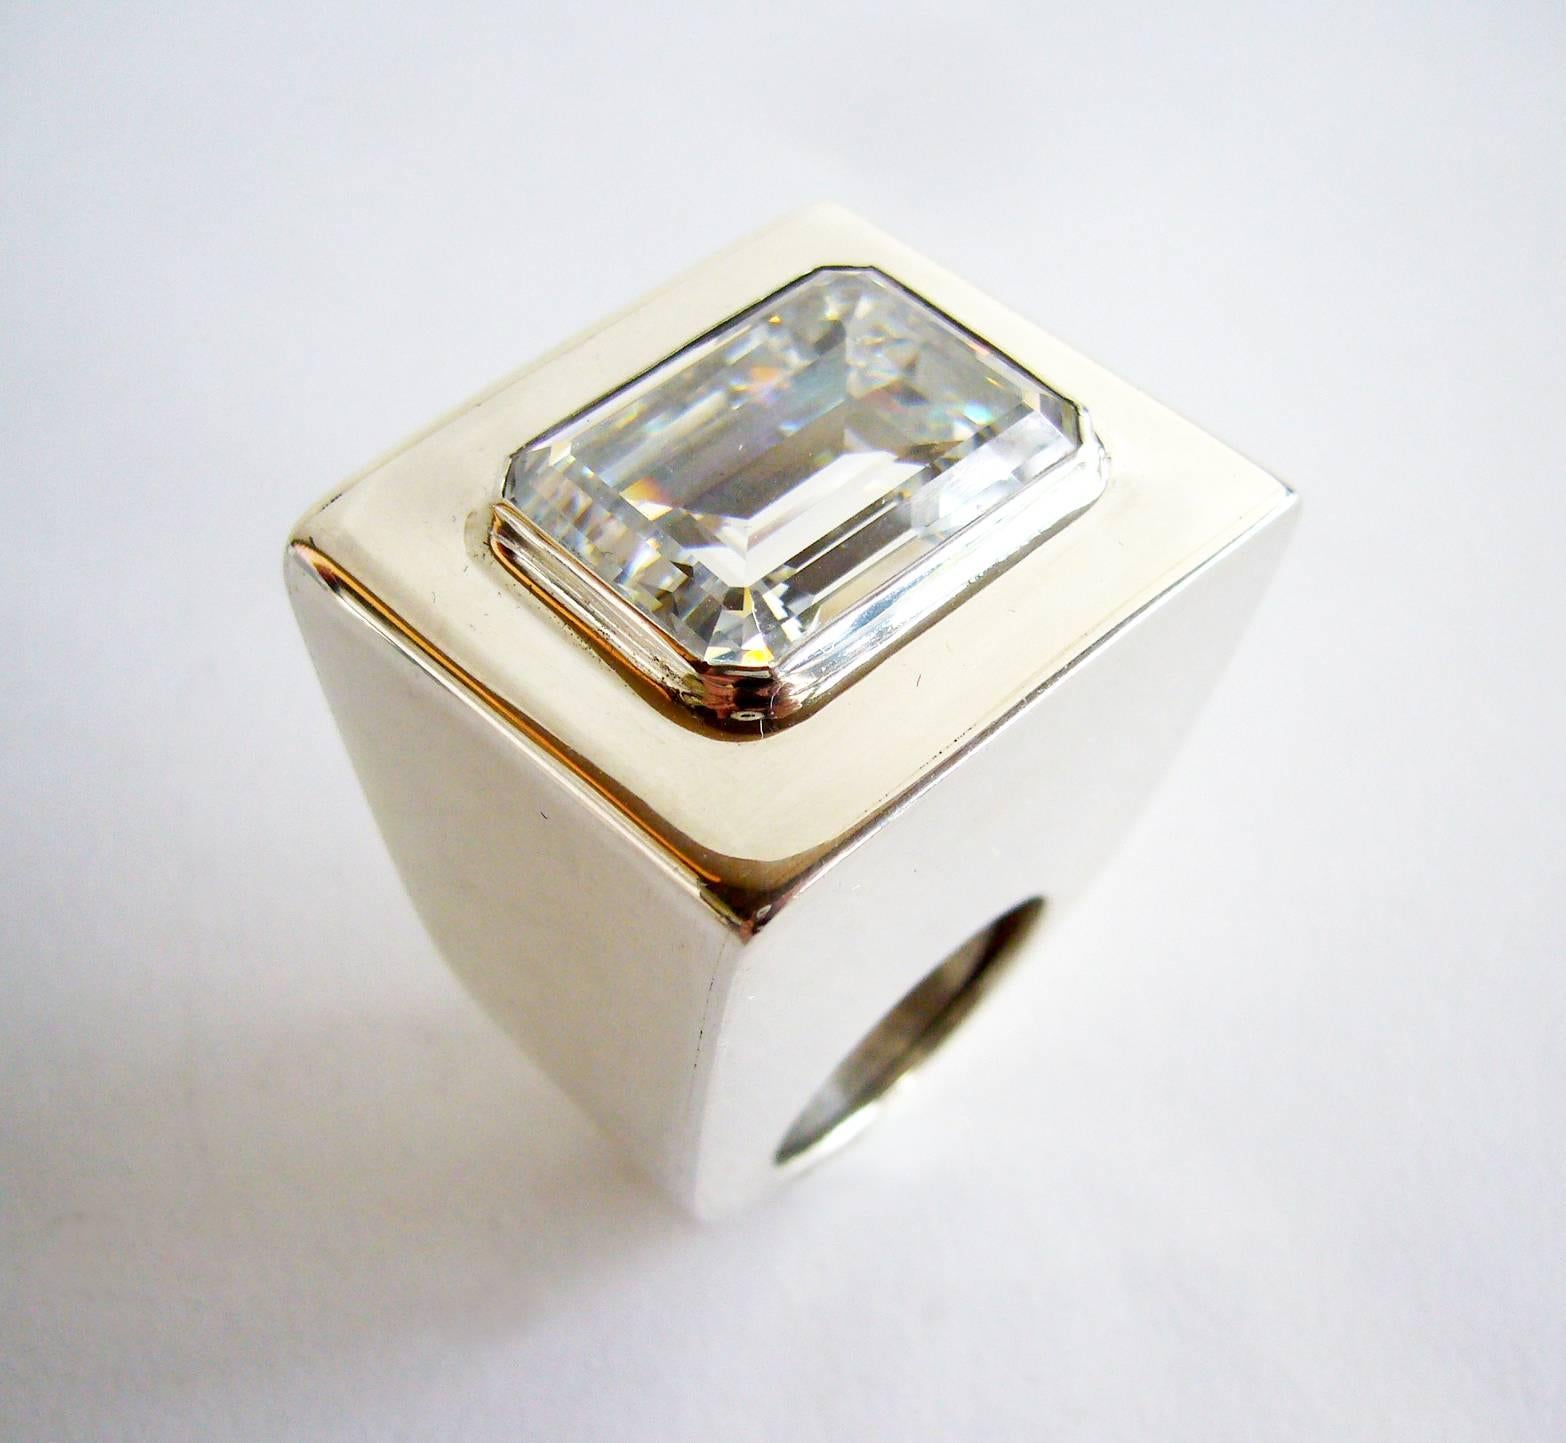 Large scale sterling silver with faceted crystal ring by Kalibré, circa 1985.  Ring is a finger size 7.5 - 8 and and stands 1